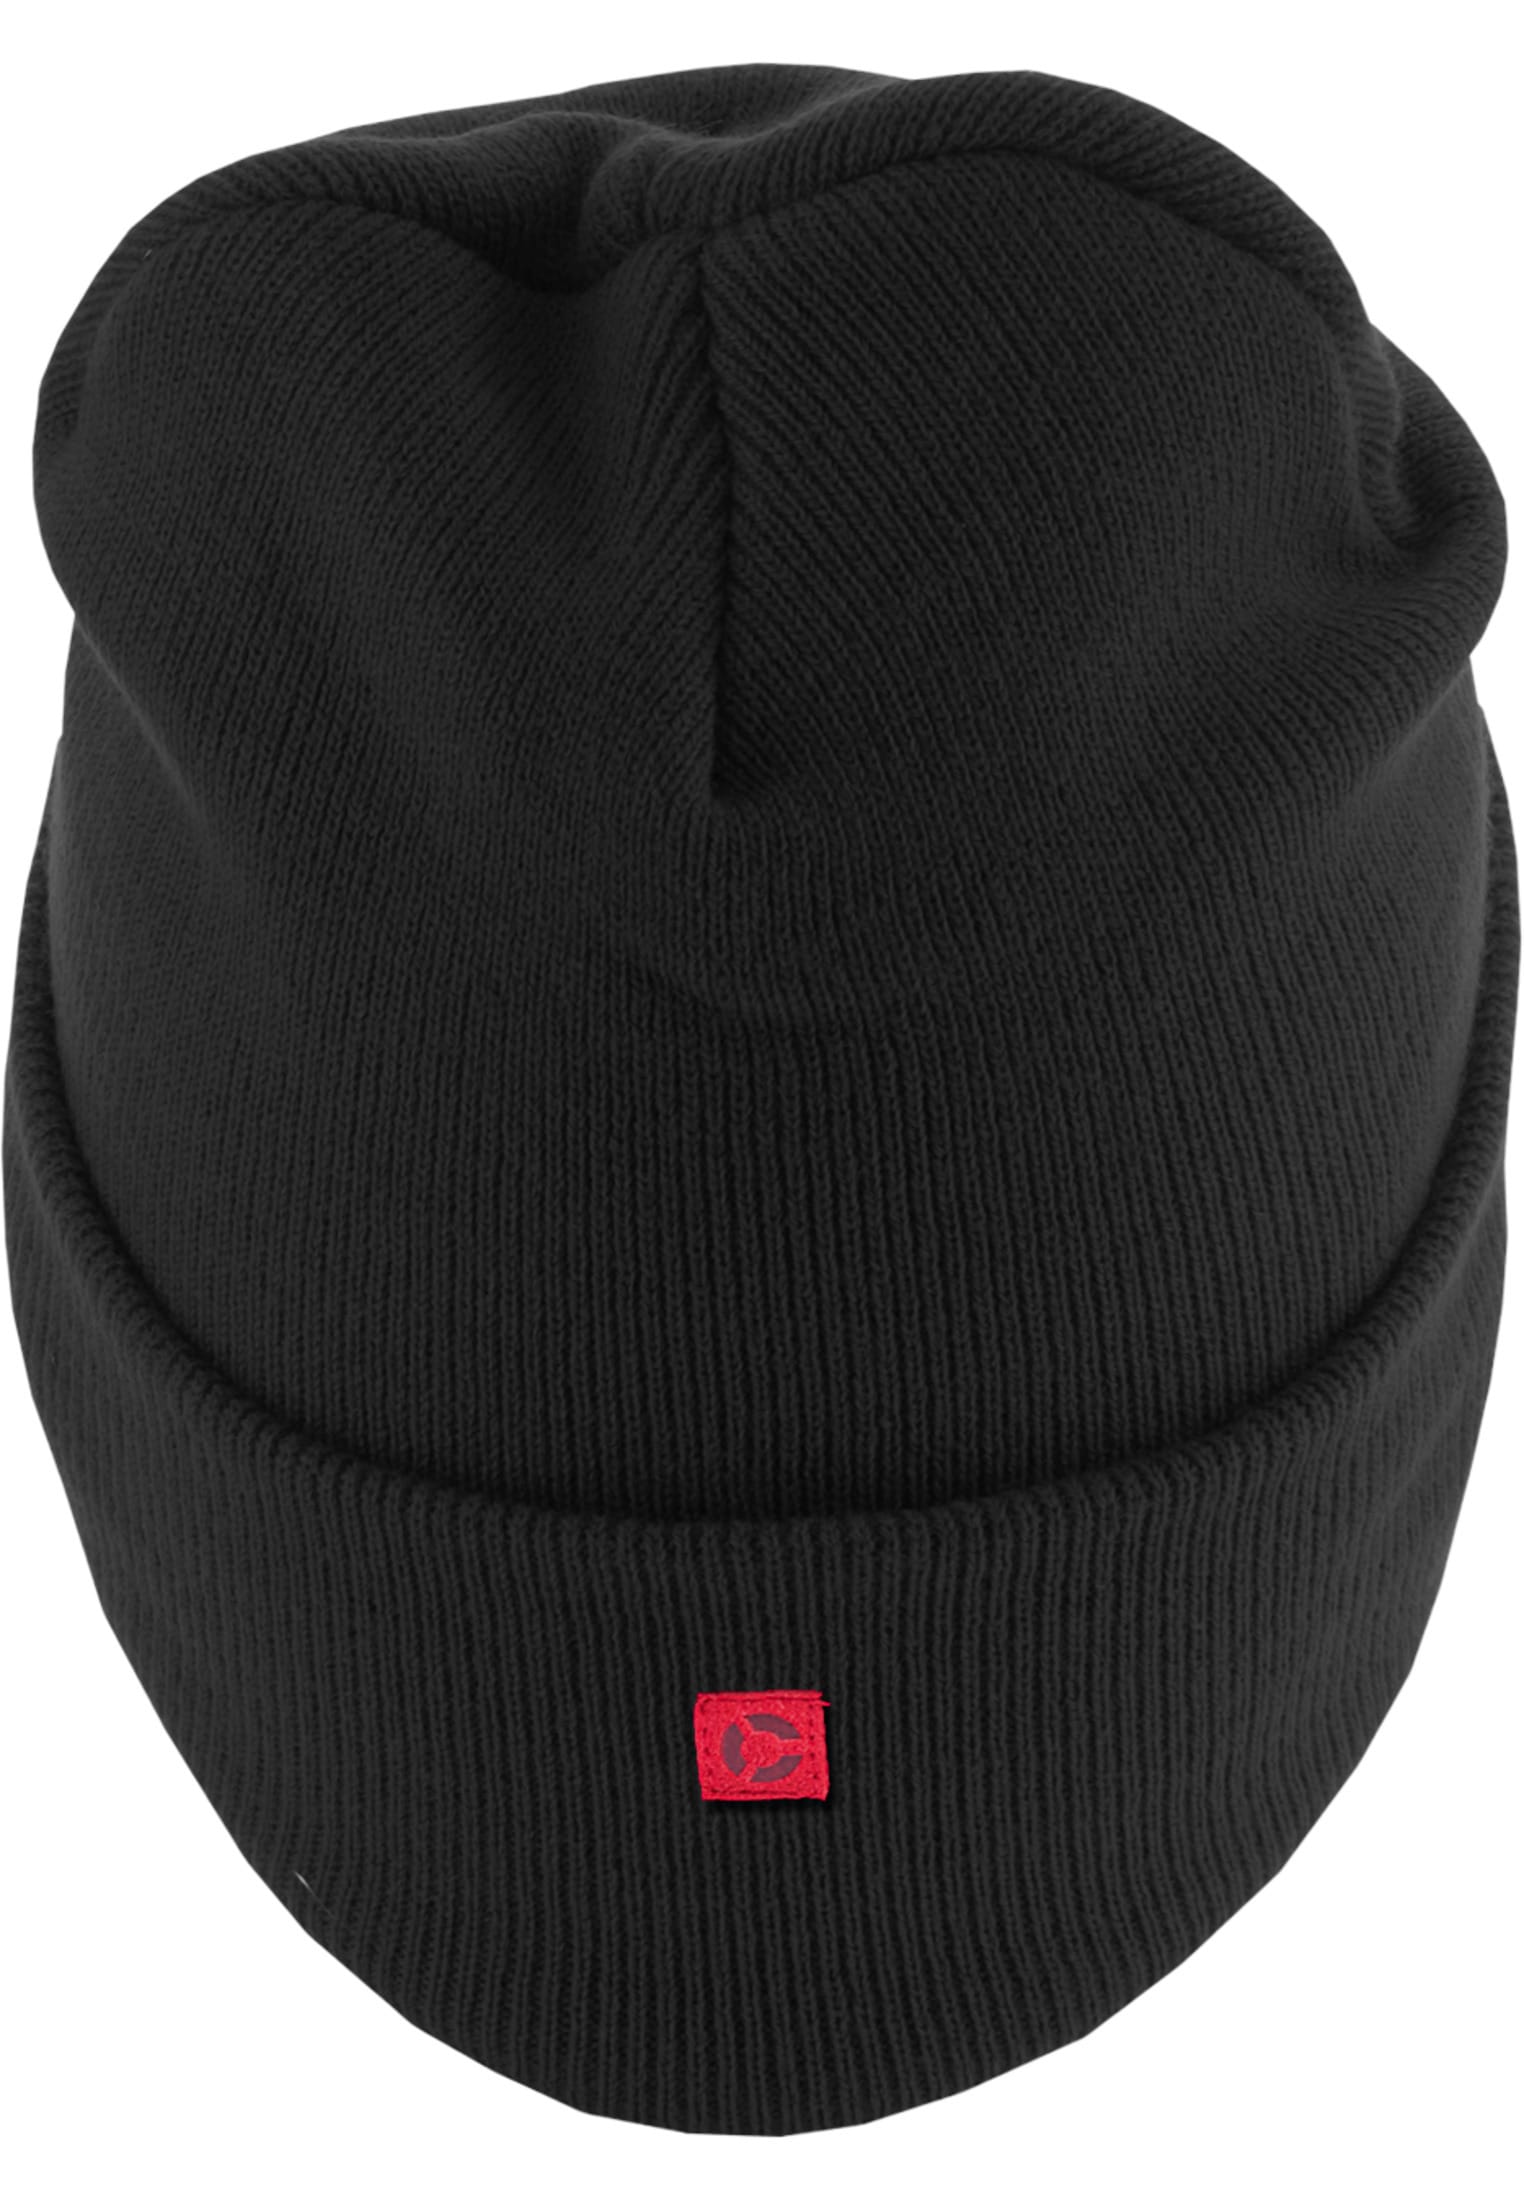 MSTRDS Beanie »Accessoires (1 | walking St.) Letter Cuff Knit Beanie«, I\'m